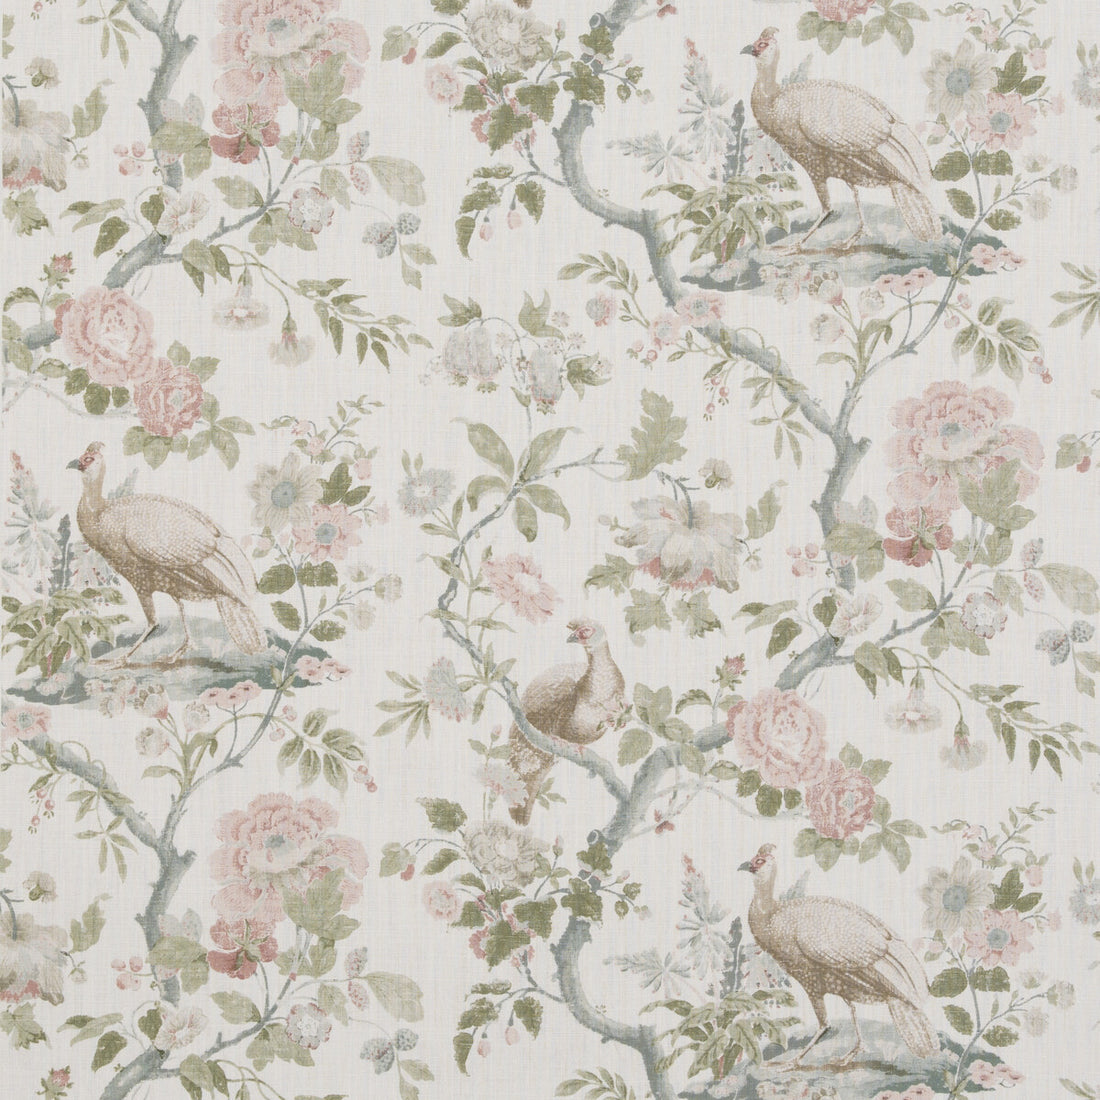 Broughton Rose fabric in blush color - pattern BP10949.2.0 - by G P &amp; J Baker in the Ashmore collection